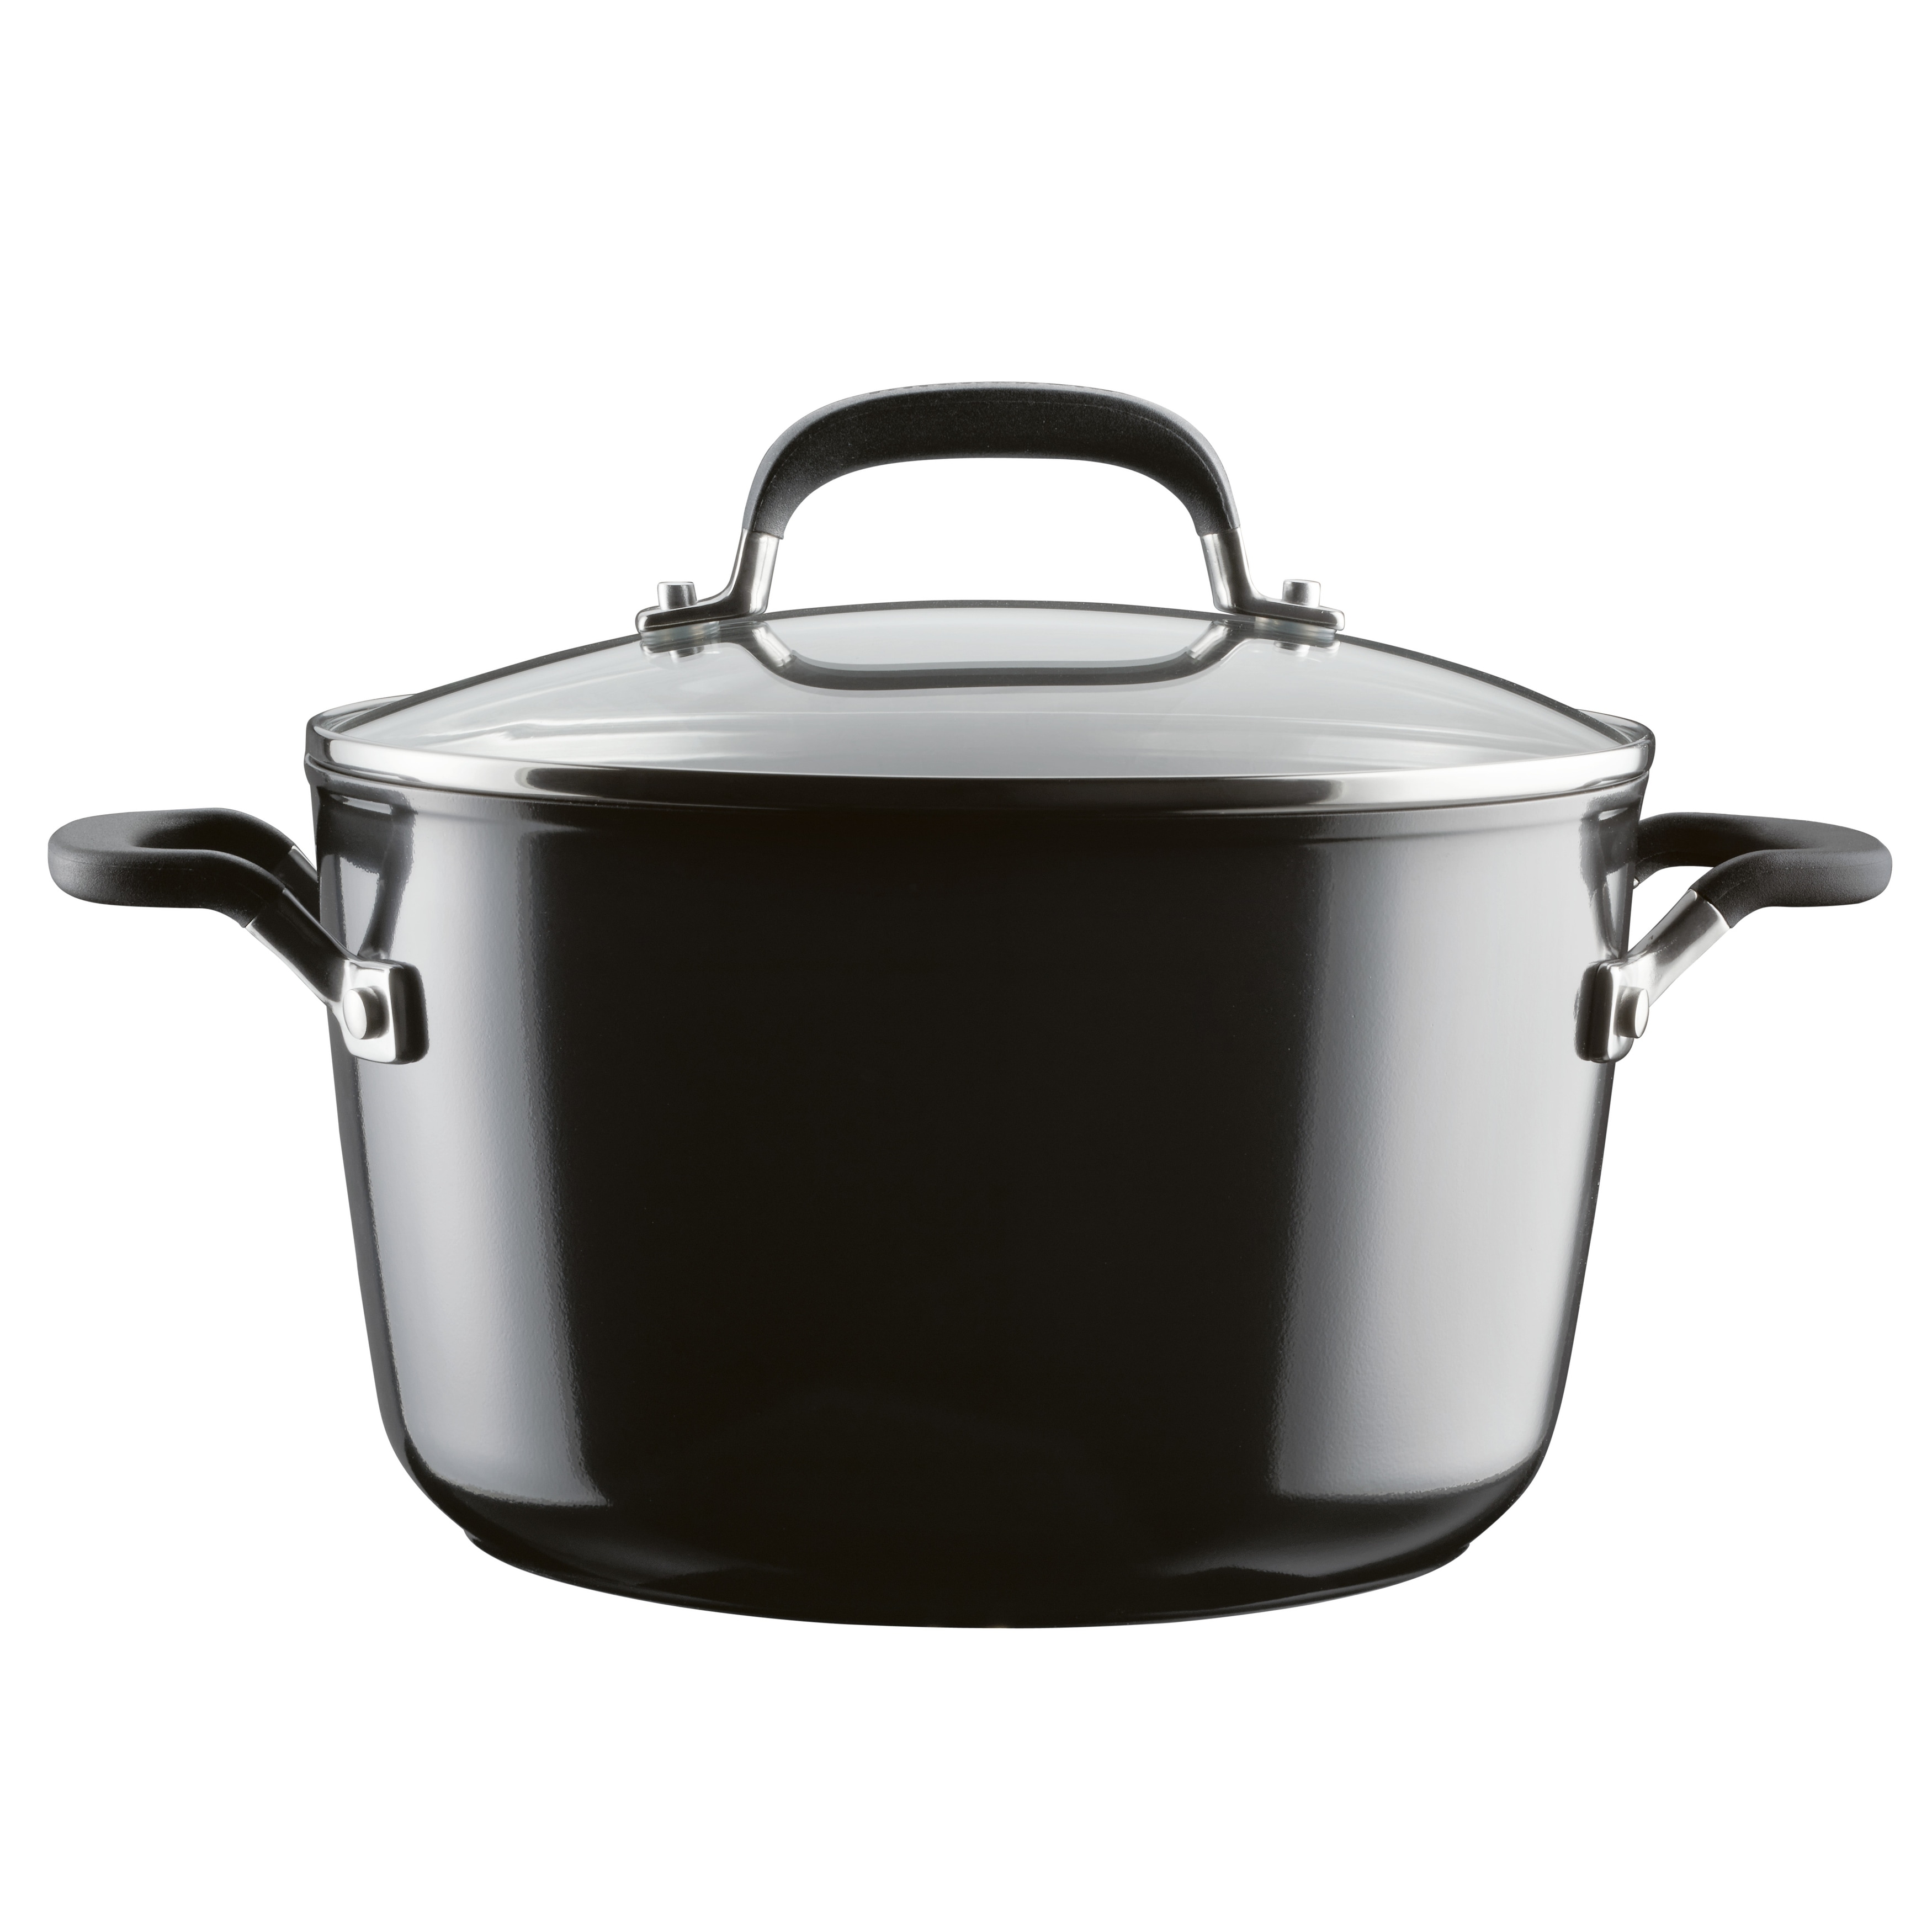 https://ak1.ostkcdn.com/images/products/is/images/direct/3a7a3b5991a0b1021aea847a2153beb30130ba13/KitchenAid-Hard-Anodized-Nonstick-Cookware-Pots-and-Pans-Set%2C-10-Piece%2C-Onyx-Black.jpg